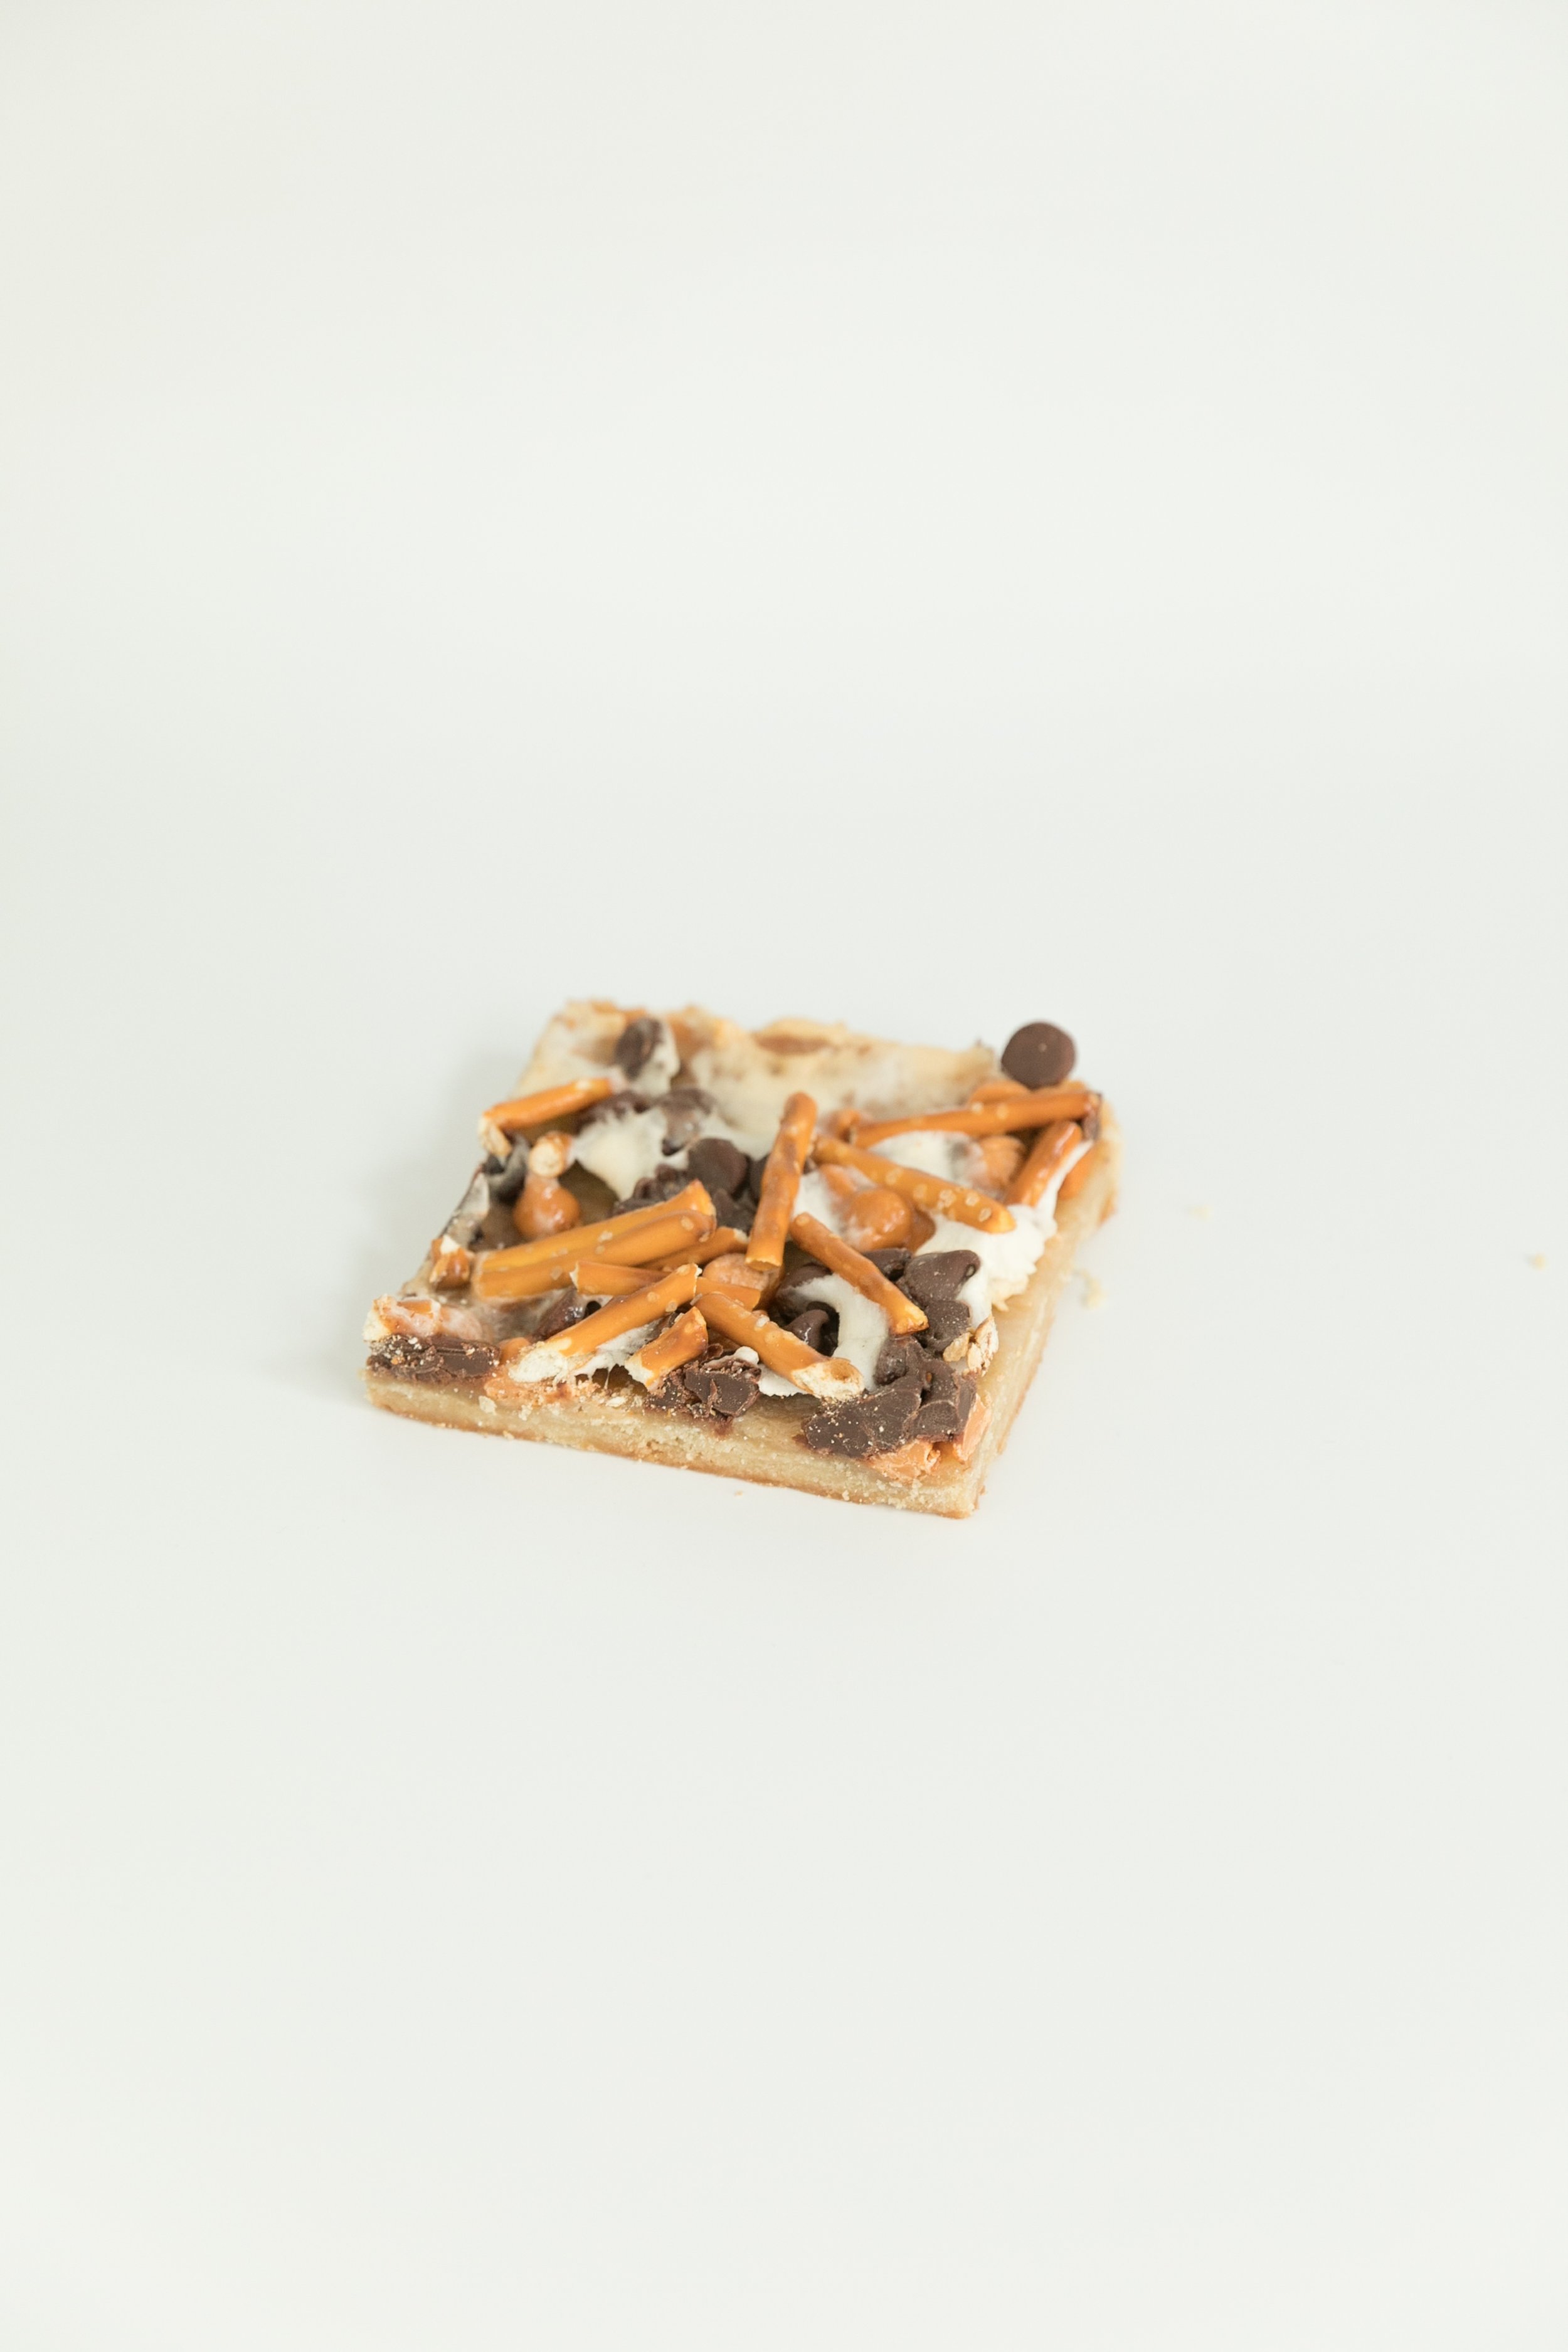  pizza bars topped with pretzels, white chocolate chips, chocolate chips, marshmallows and a cookie bottom.  